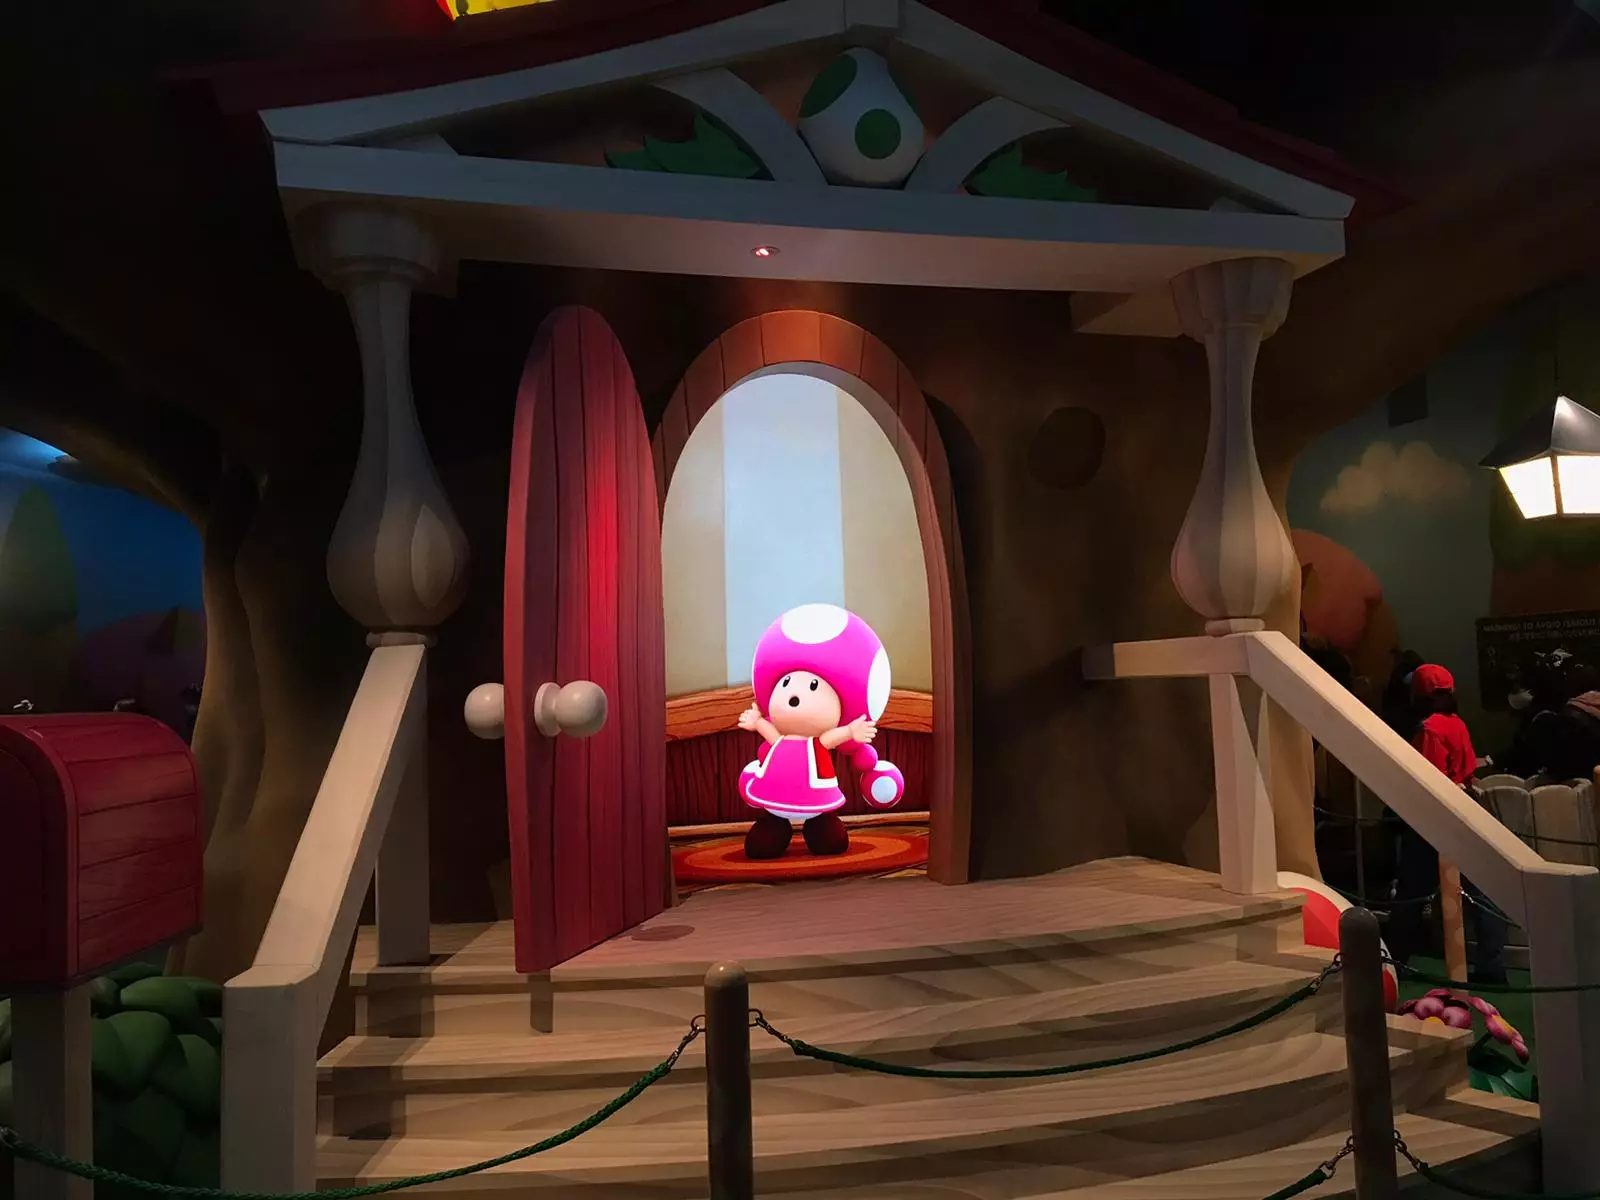 Toadette is digitally rendered here, but you wouldn't know it in person /